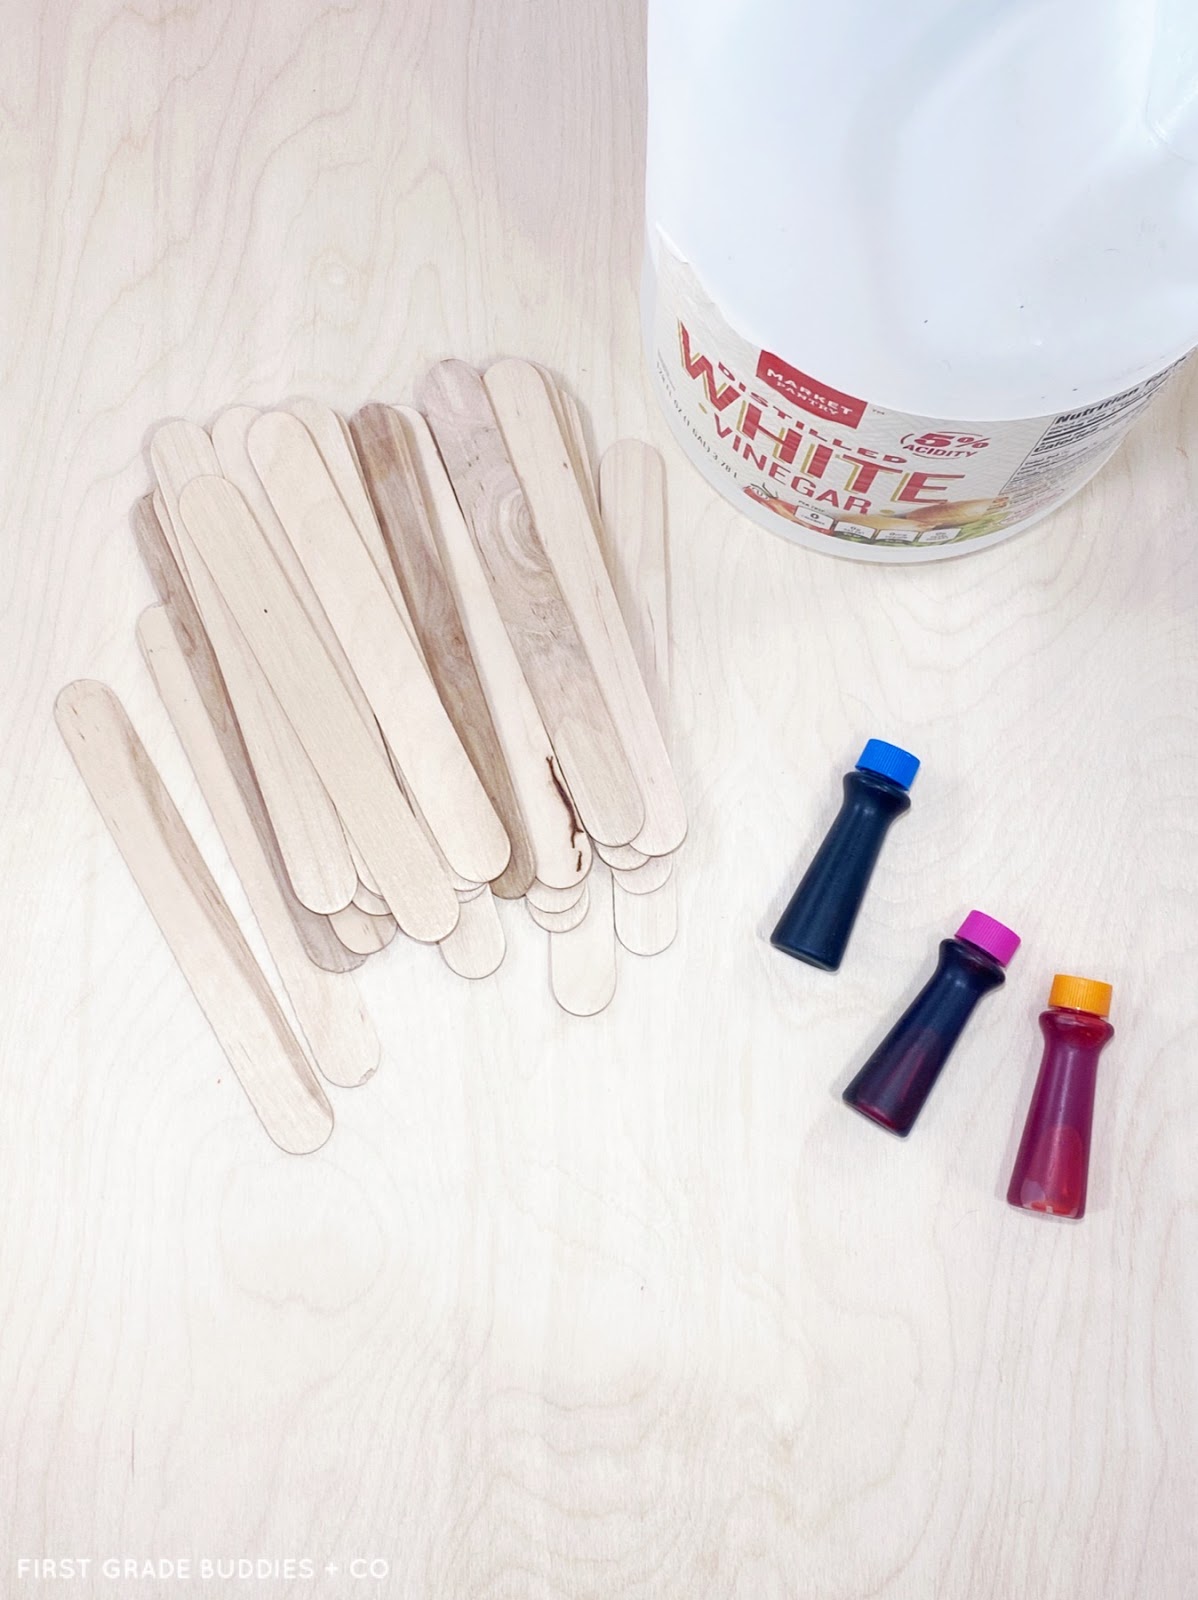 Don't know if these dyed popsicle sticks are food safe, is it